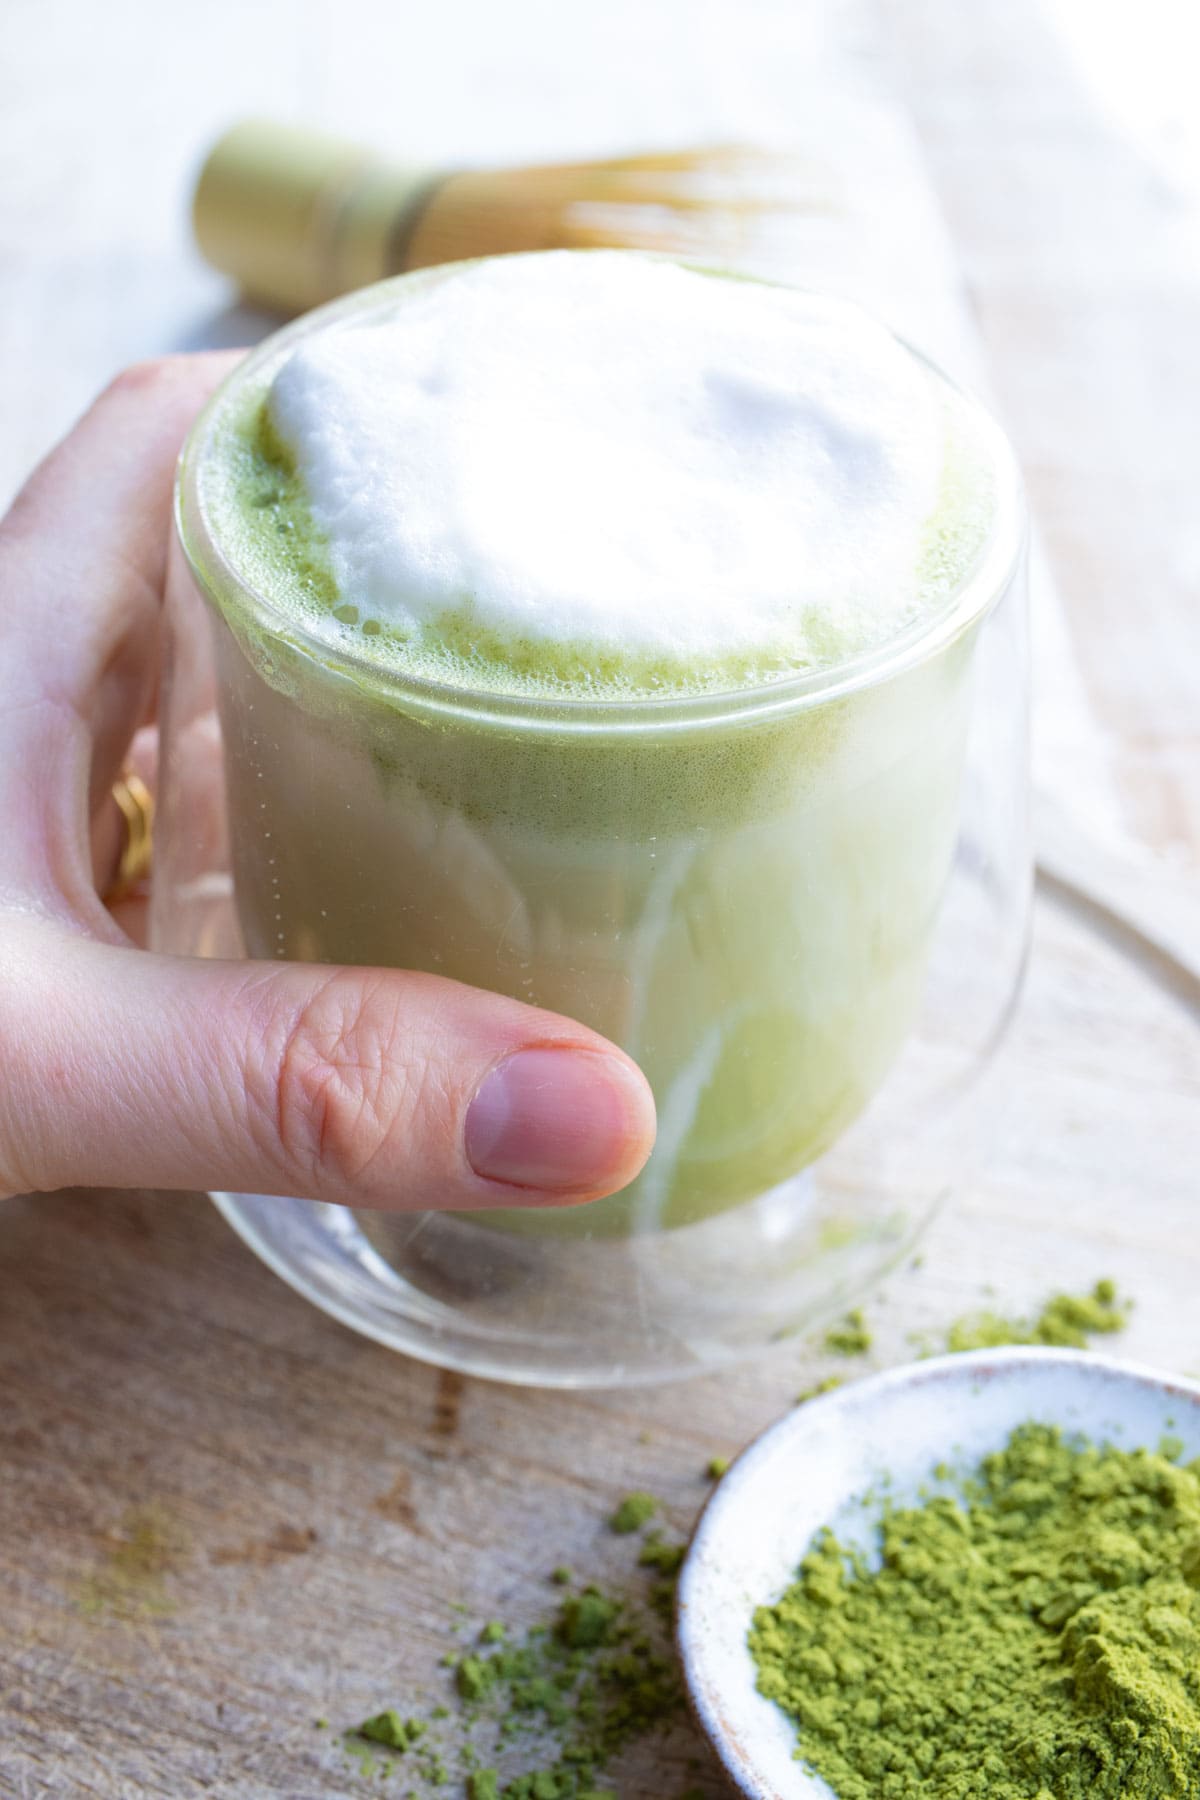 Hand taking a cup with matcha latte.